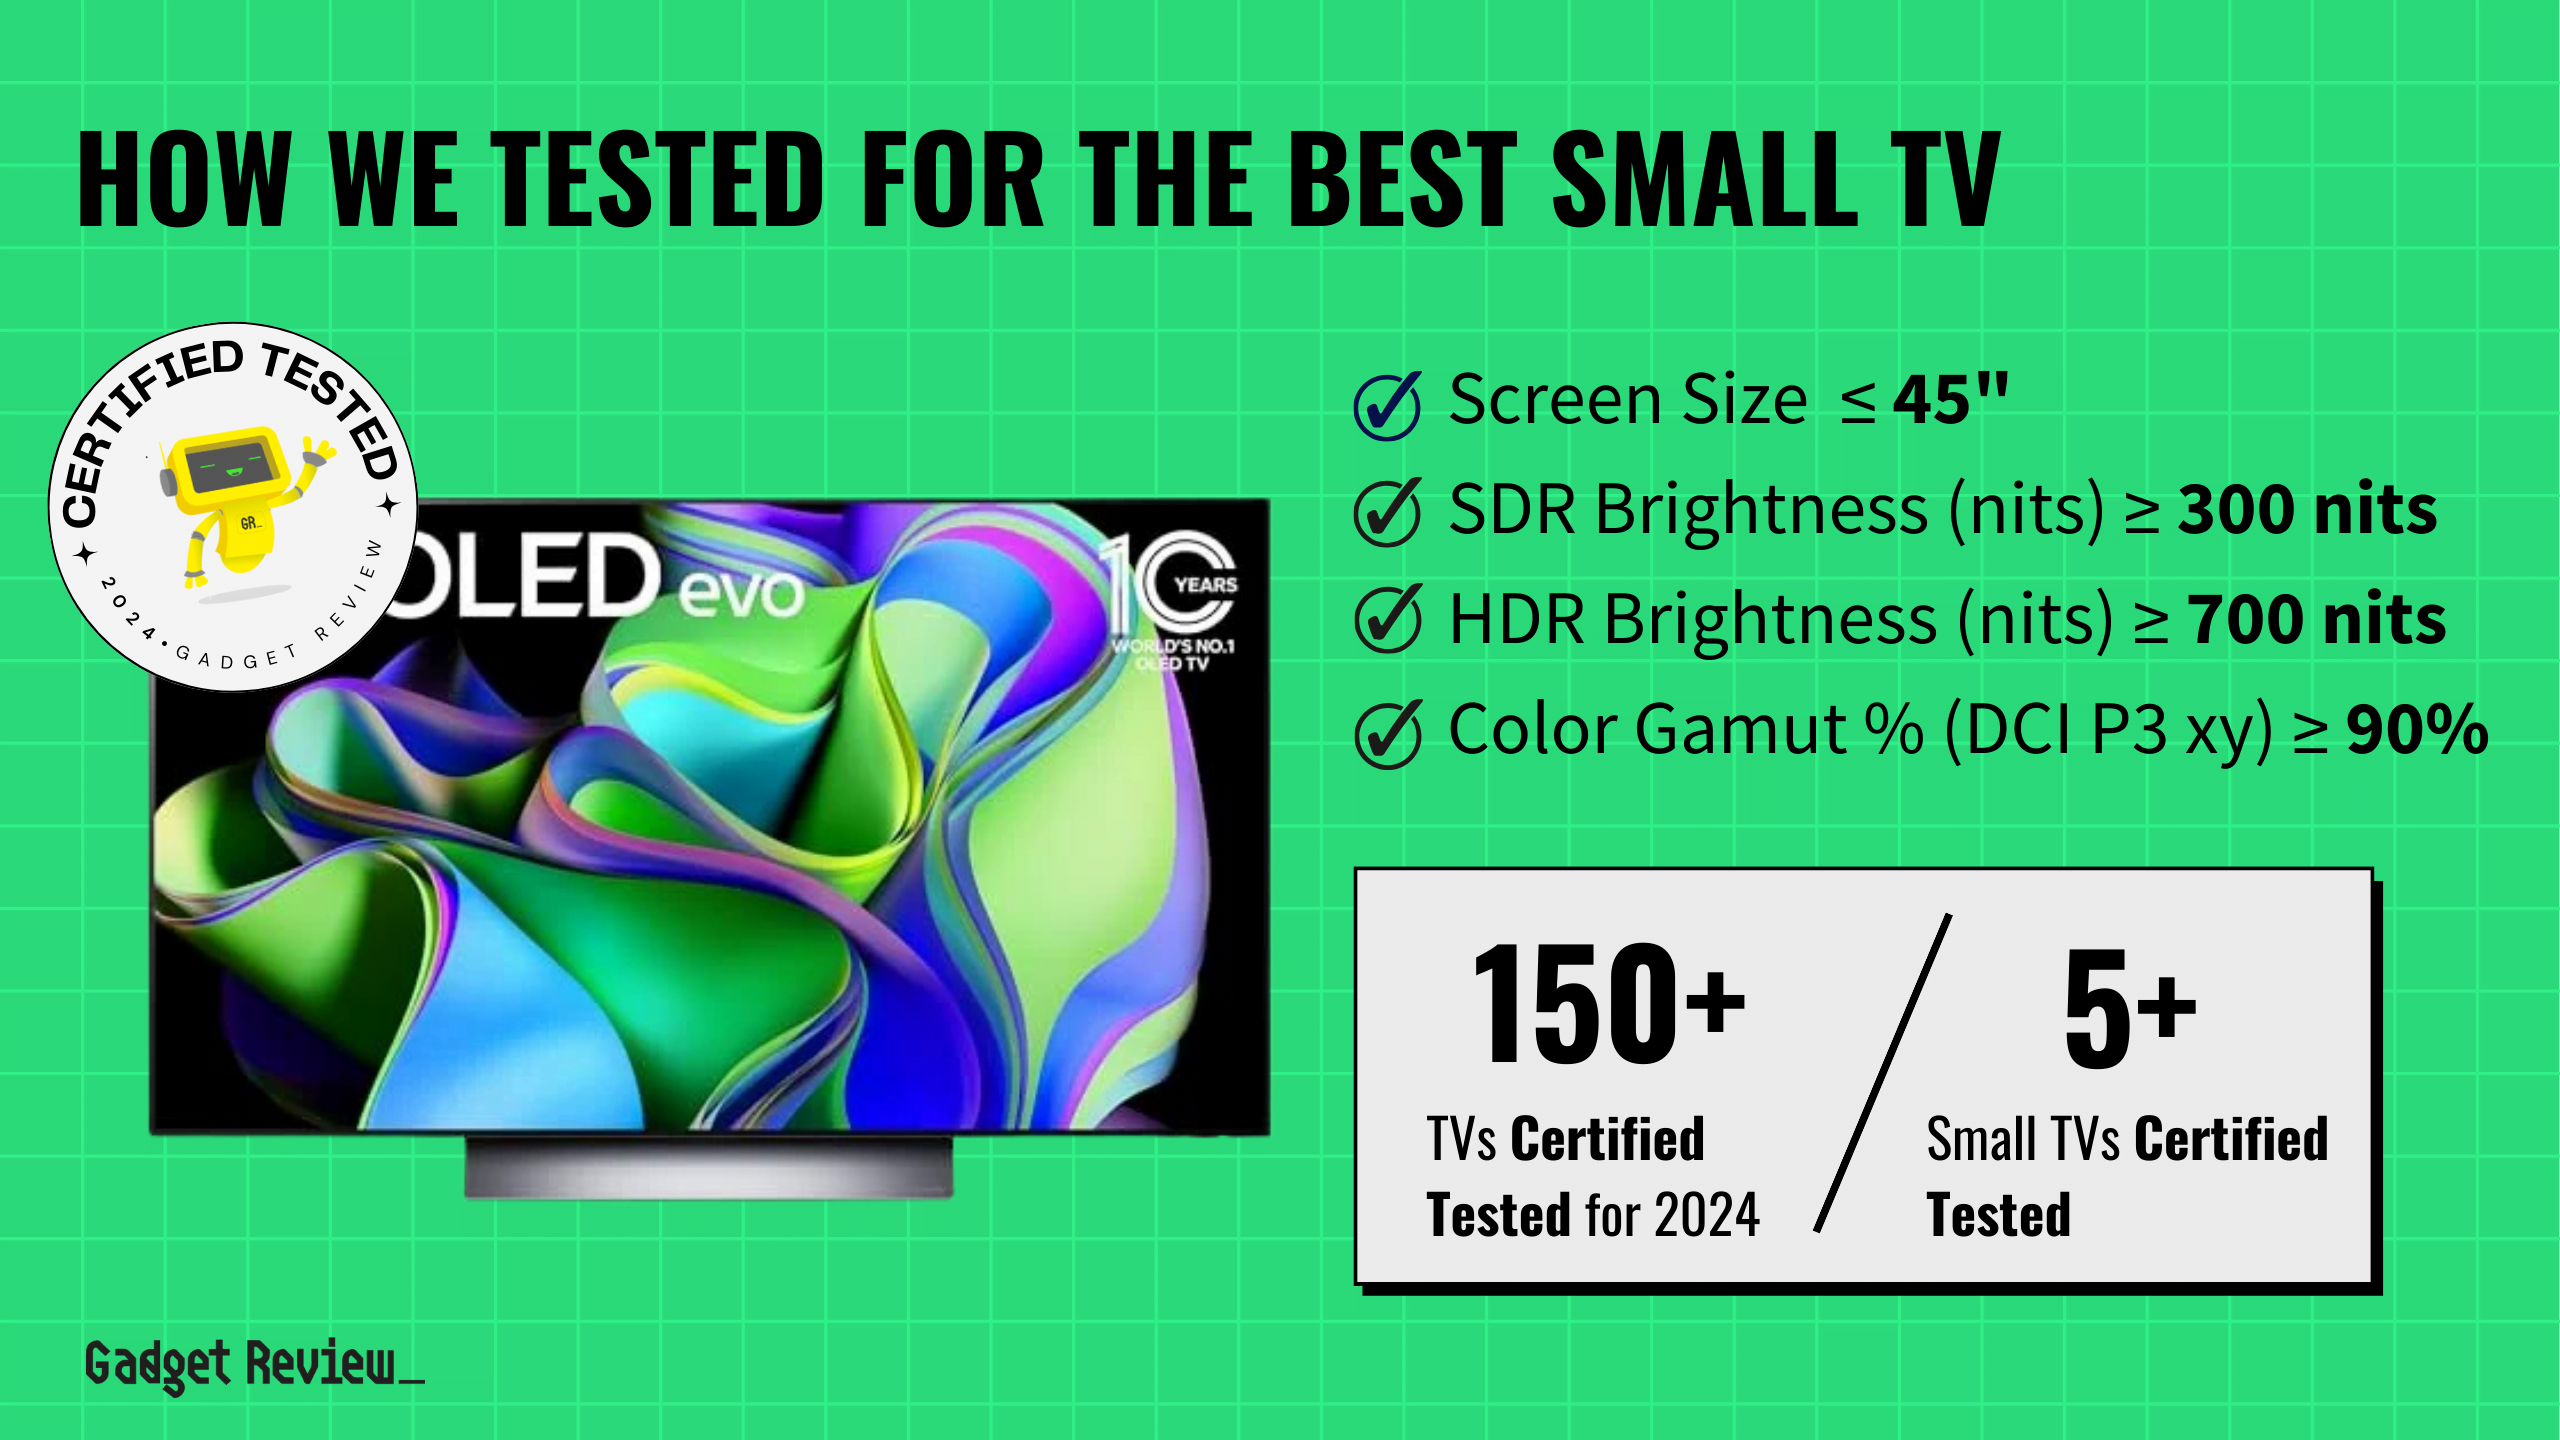 We Ranked The 4 Best Small TVs